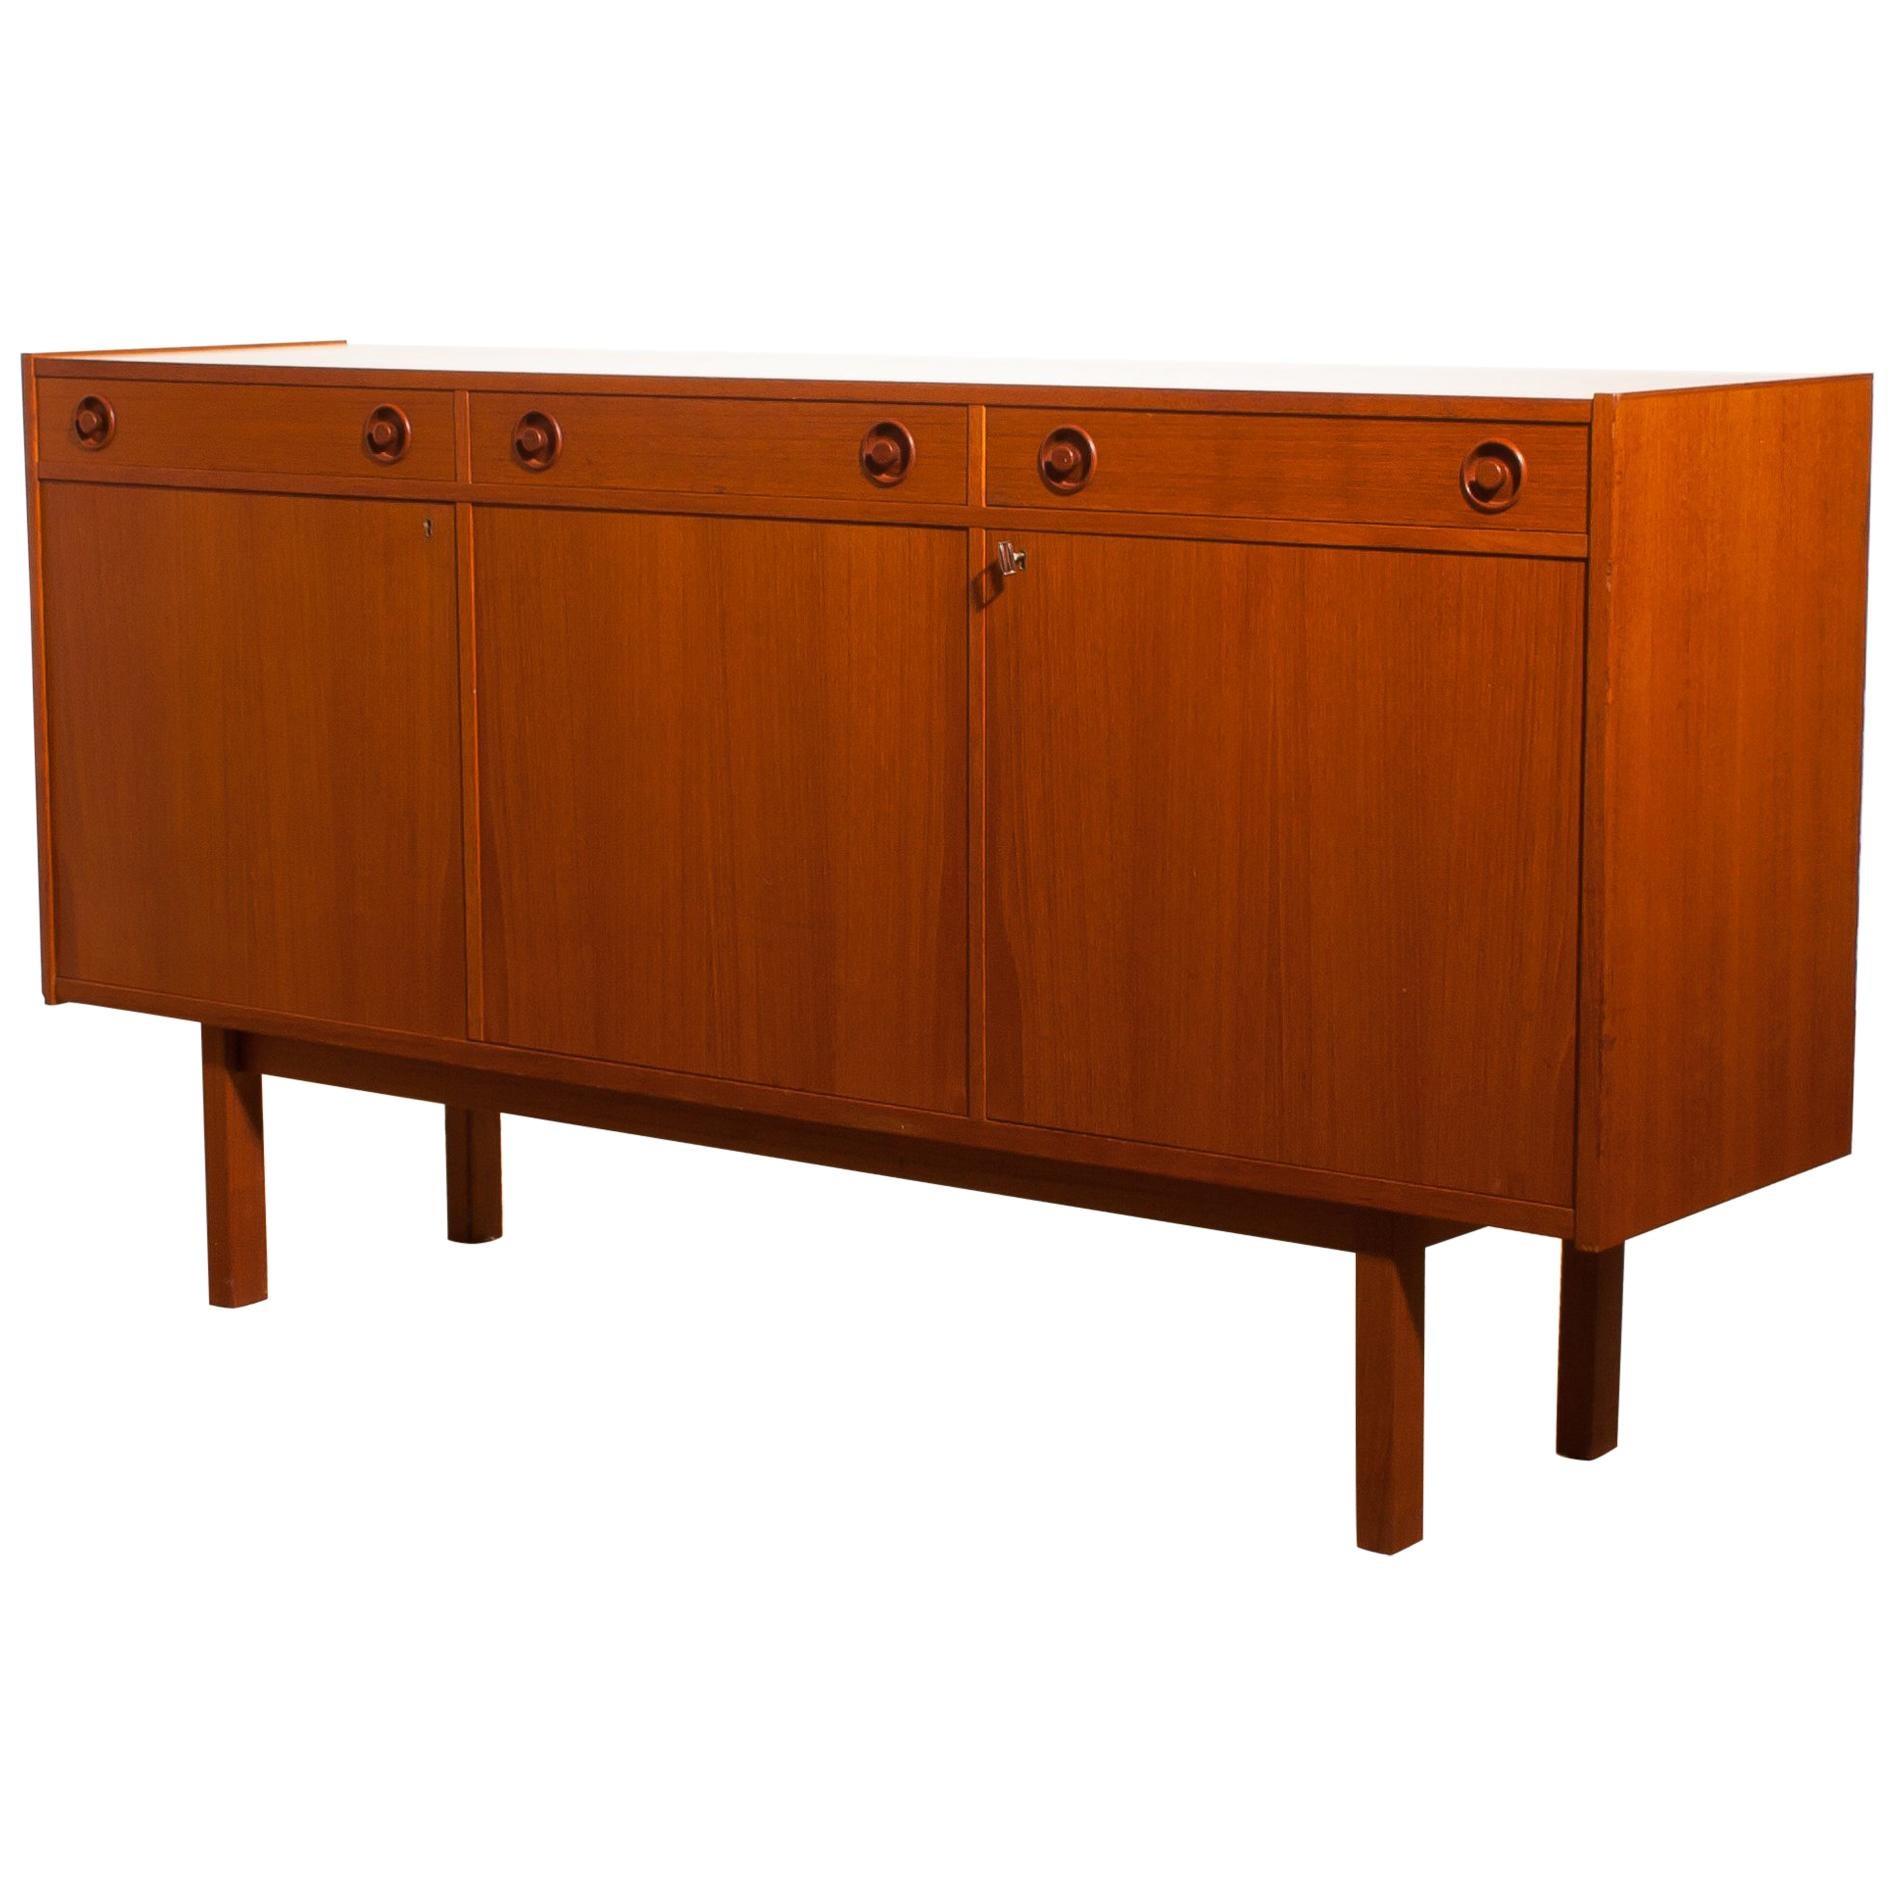 Beautiful sideboard produced by Brexo Möbler, Sweden.
This cabinet is made of teak and has three drawers and three doors.
It is in very nice condition.
Key included.
Period 1950s.
Dimensions: H 90 cm, W 170 cm, D 42 cm.